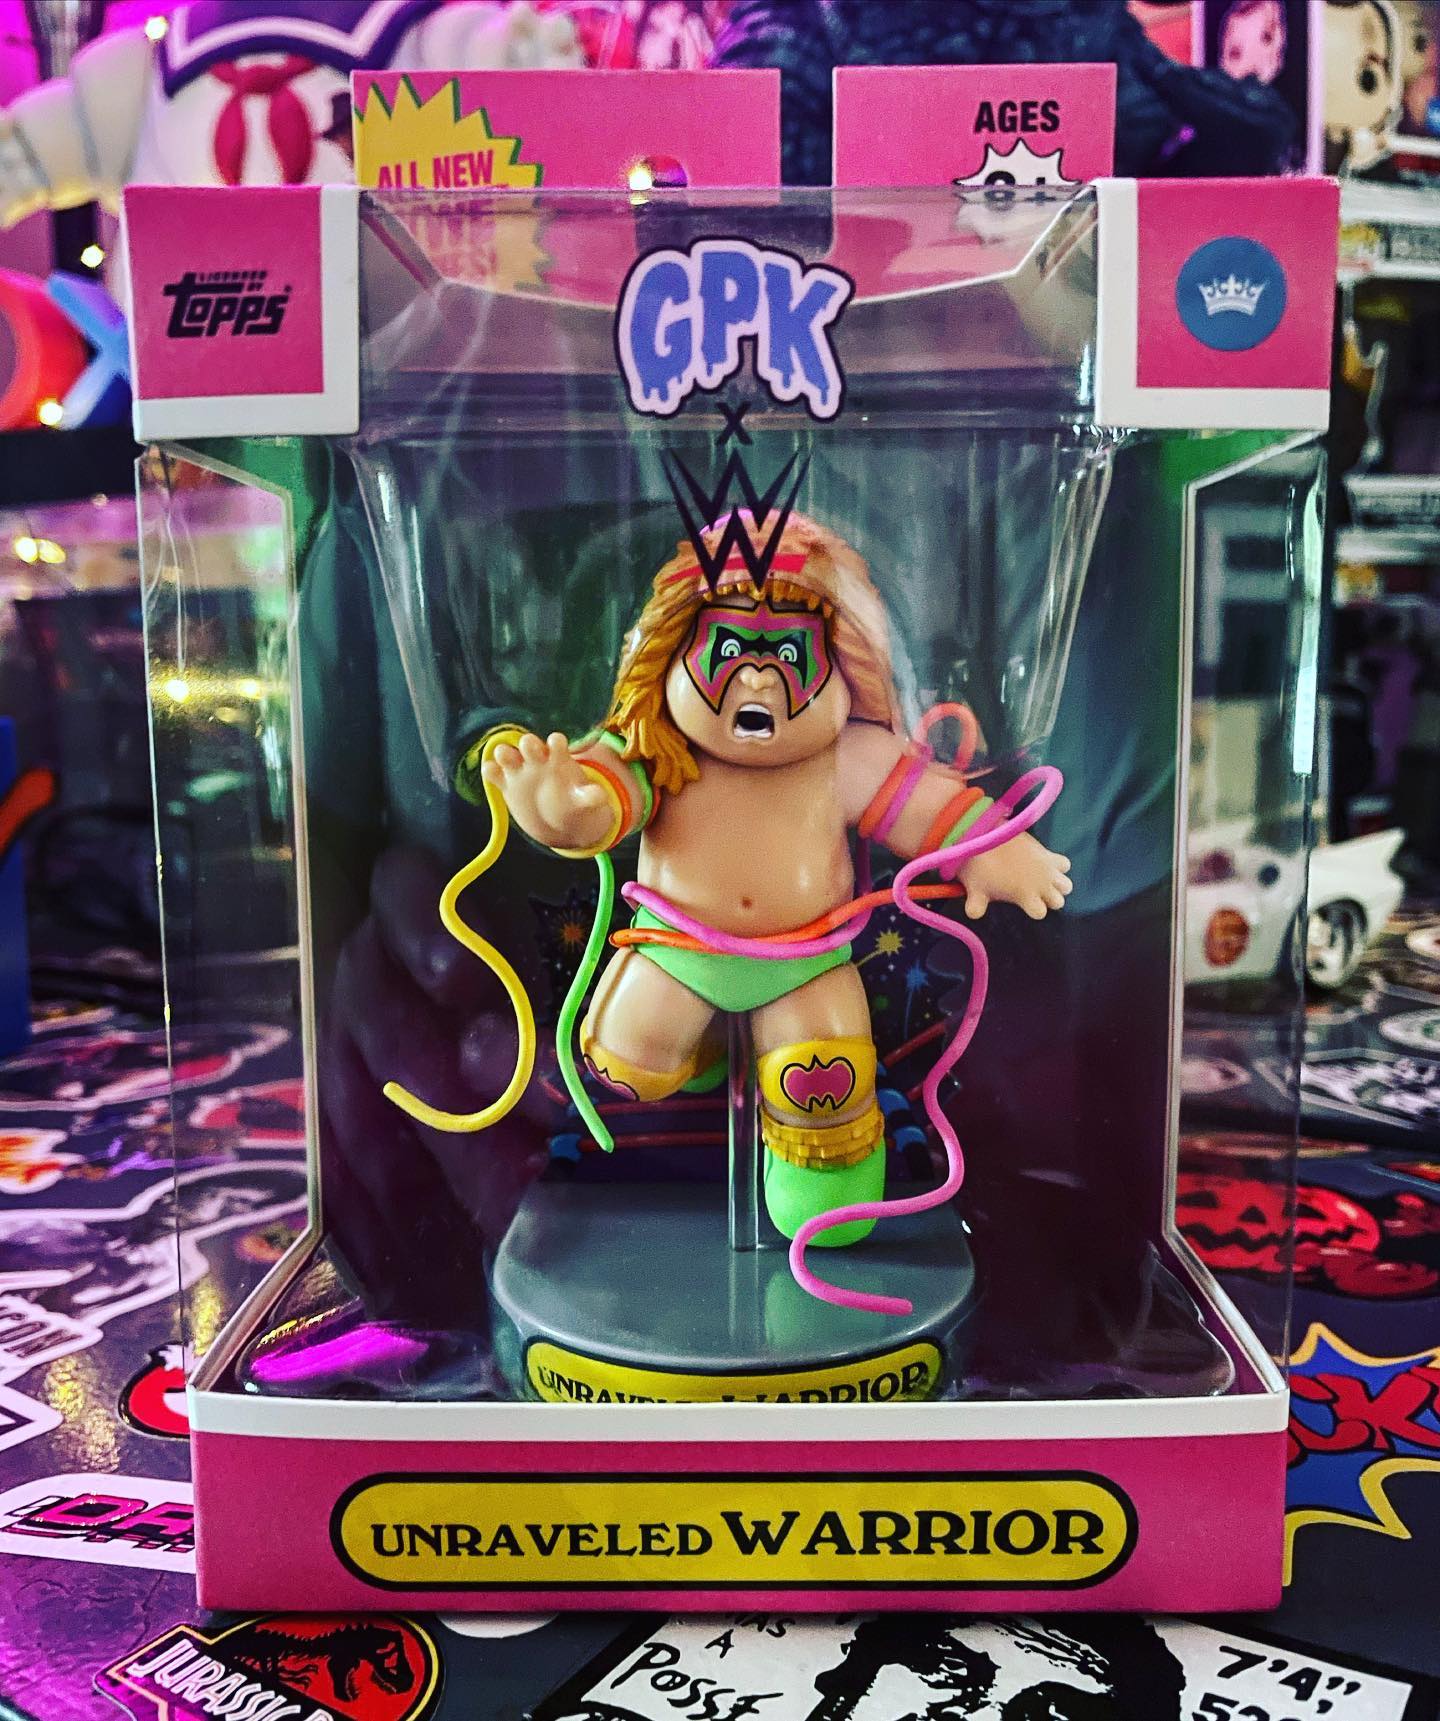 Shoutout to @dastomper who gifted me this magical blend of 1980s magic! #garbagepailkids #ultimatewarrior #mashups #wwf #wwe #nostalgia #collecting #popculture #theultimatewarrior #wrestling #prowrestling